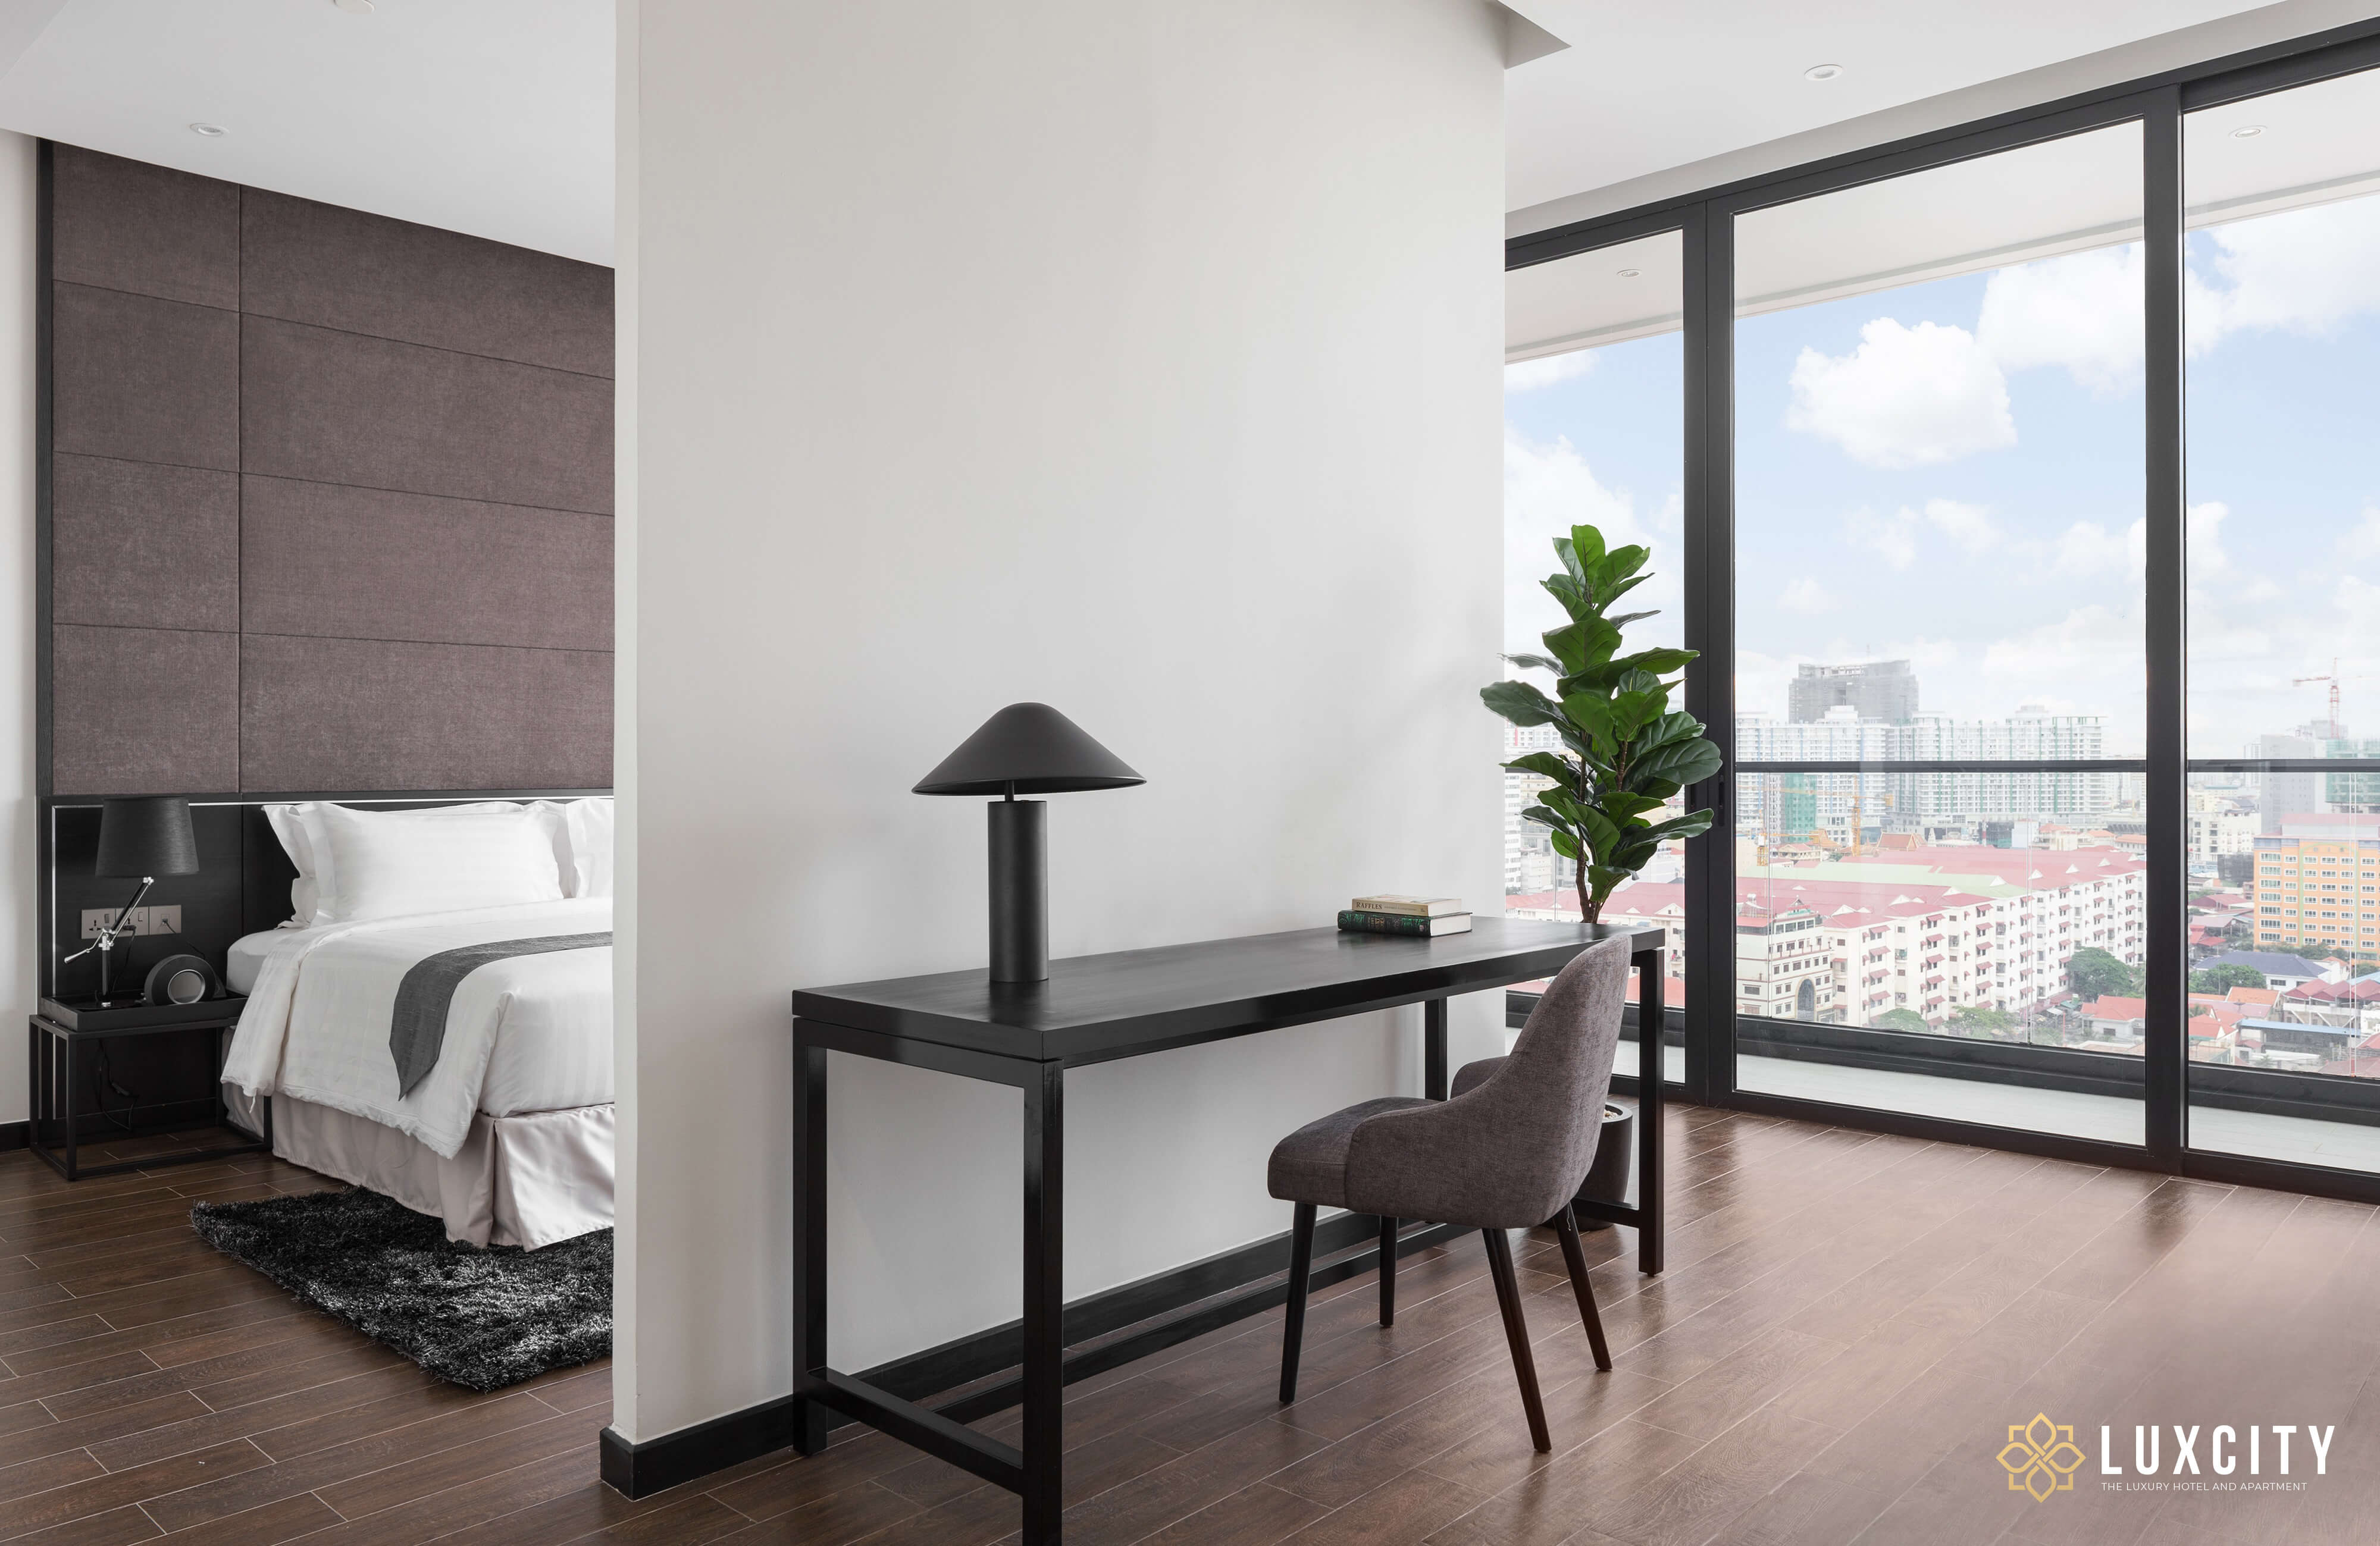 Luxcity Hotel & Apartment is one of the resorts with the best quality service in Phnom Penh.